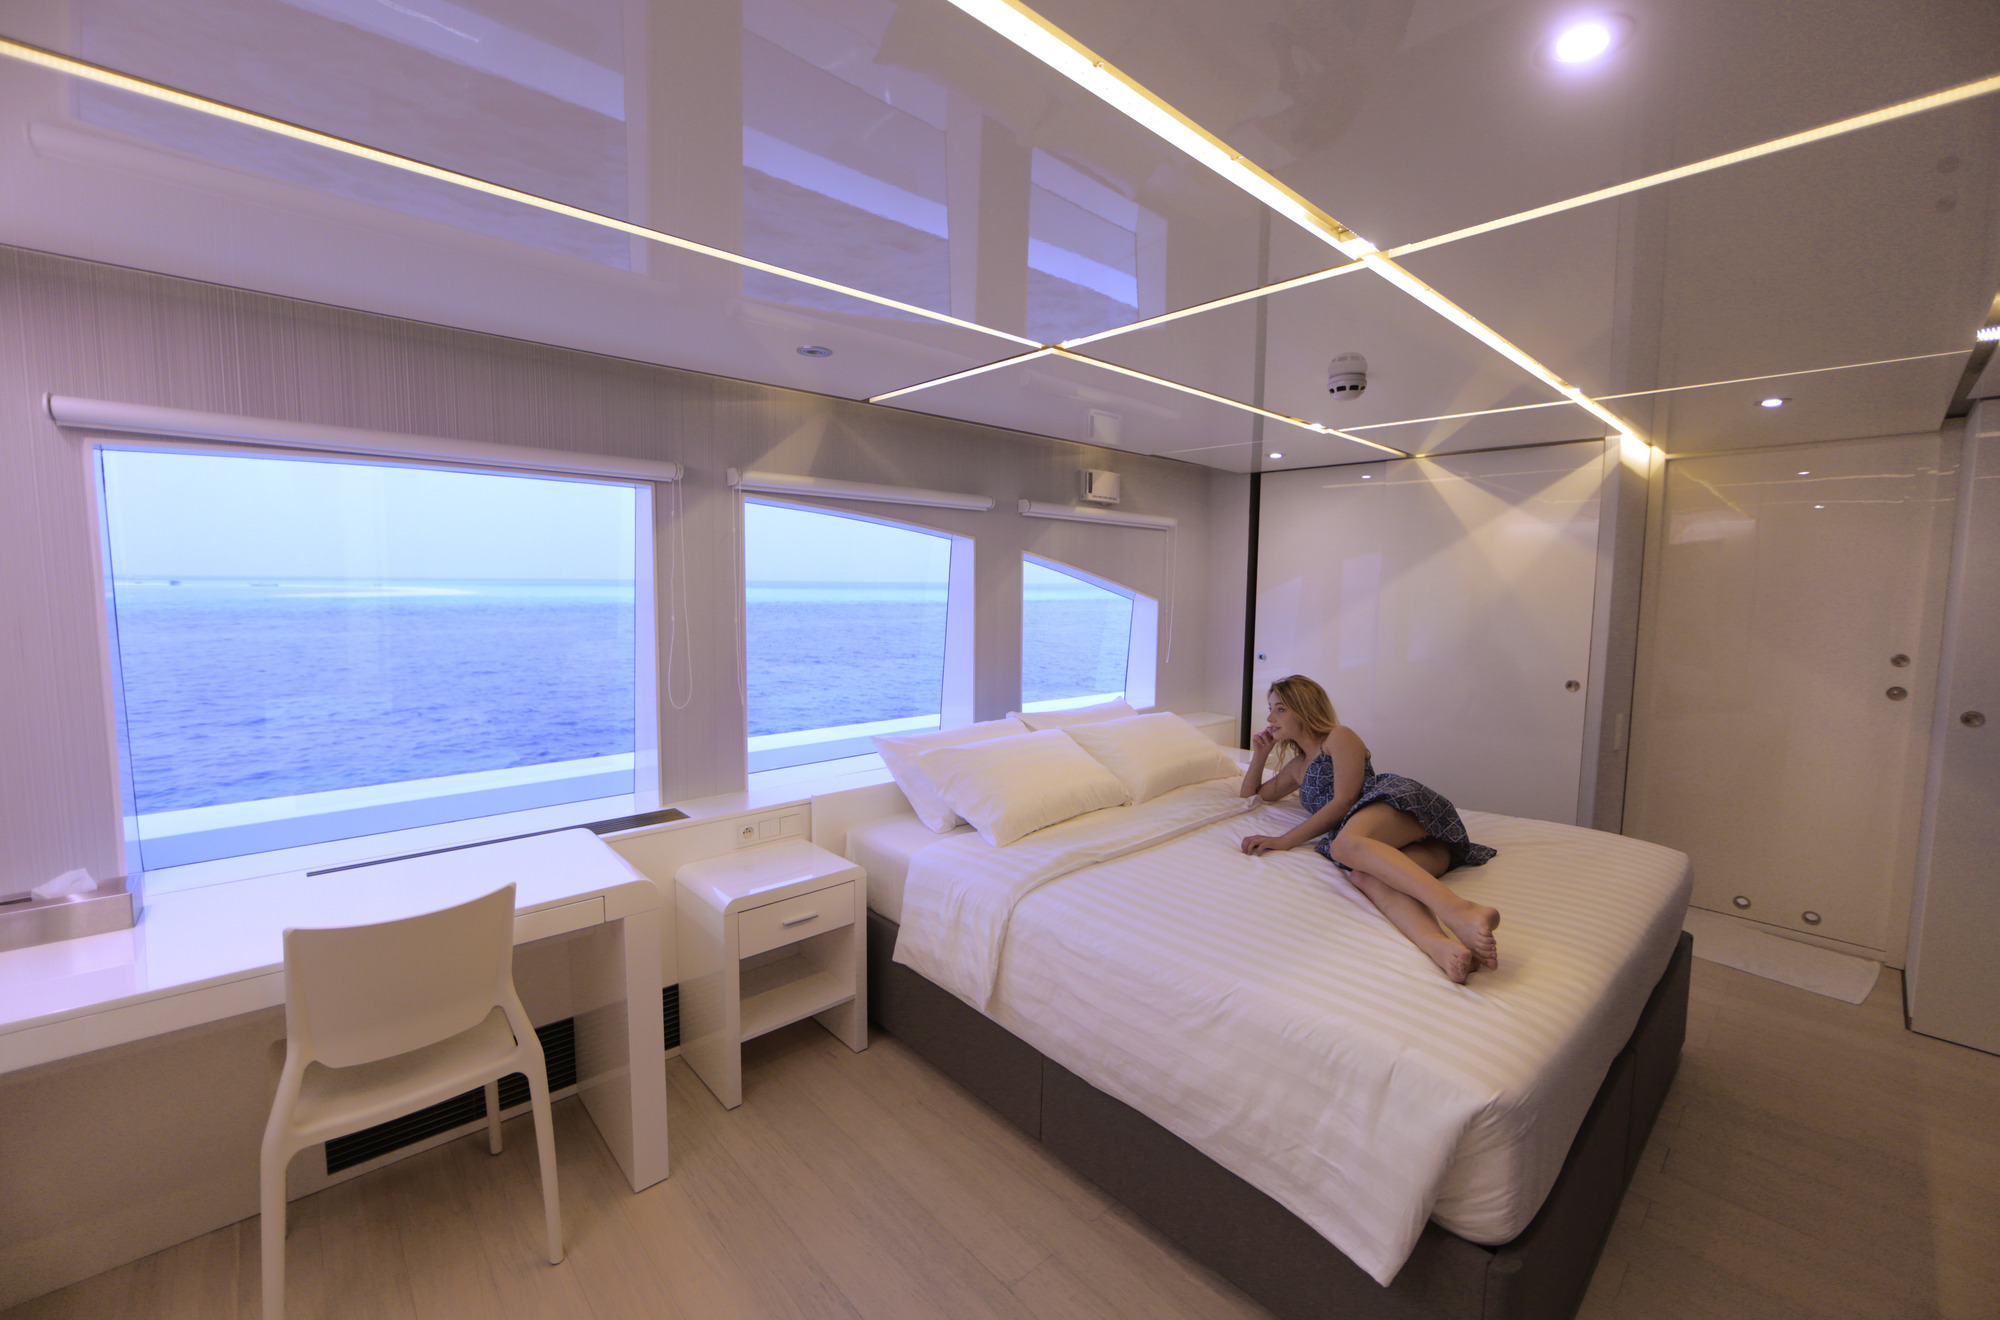 Maldives Motor Yacht SEAREX - One Of The Suites